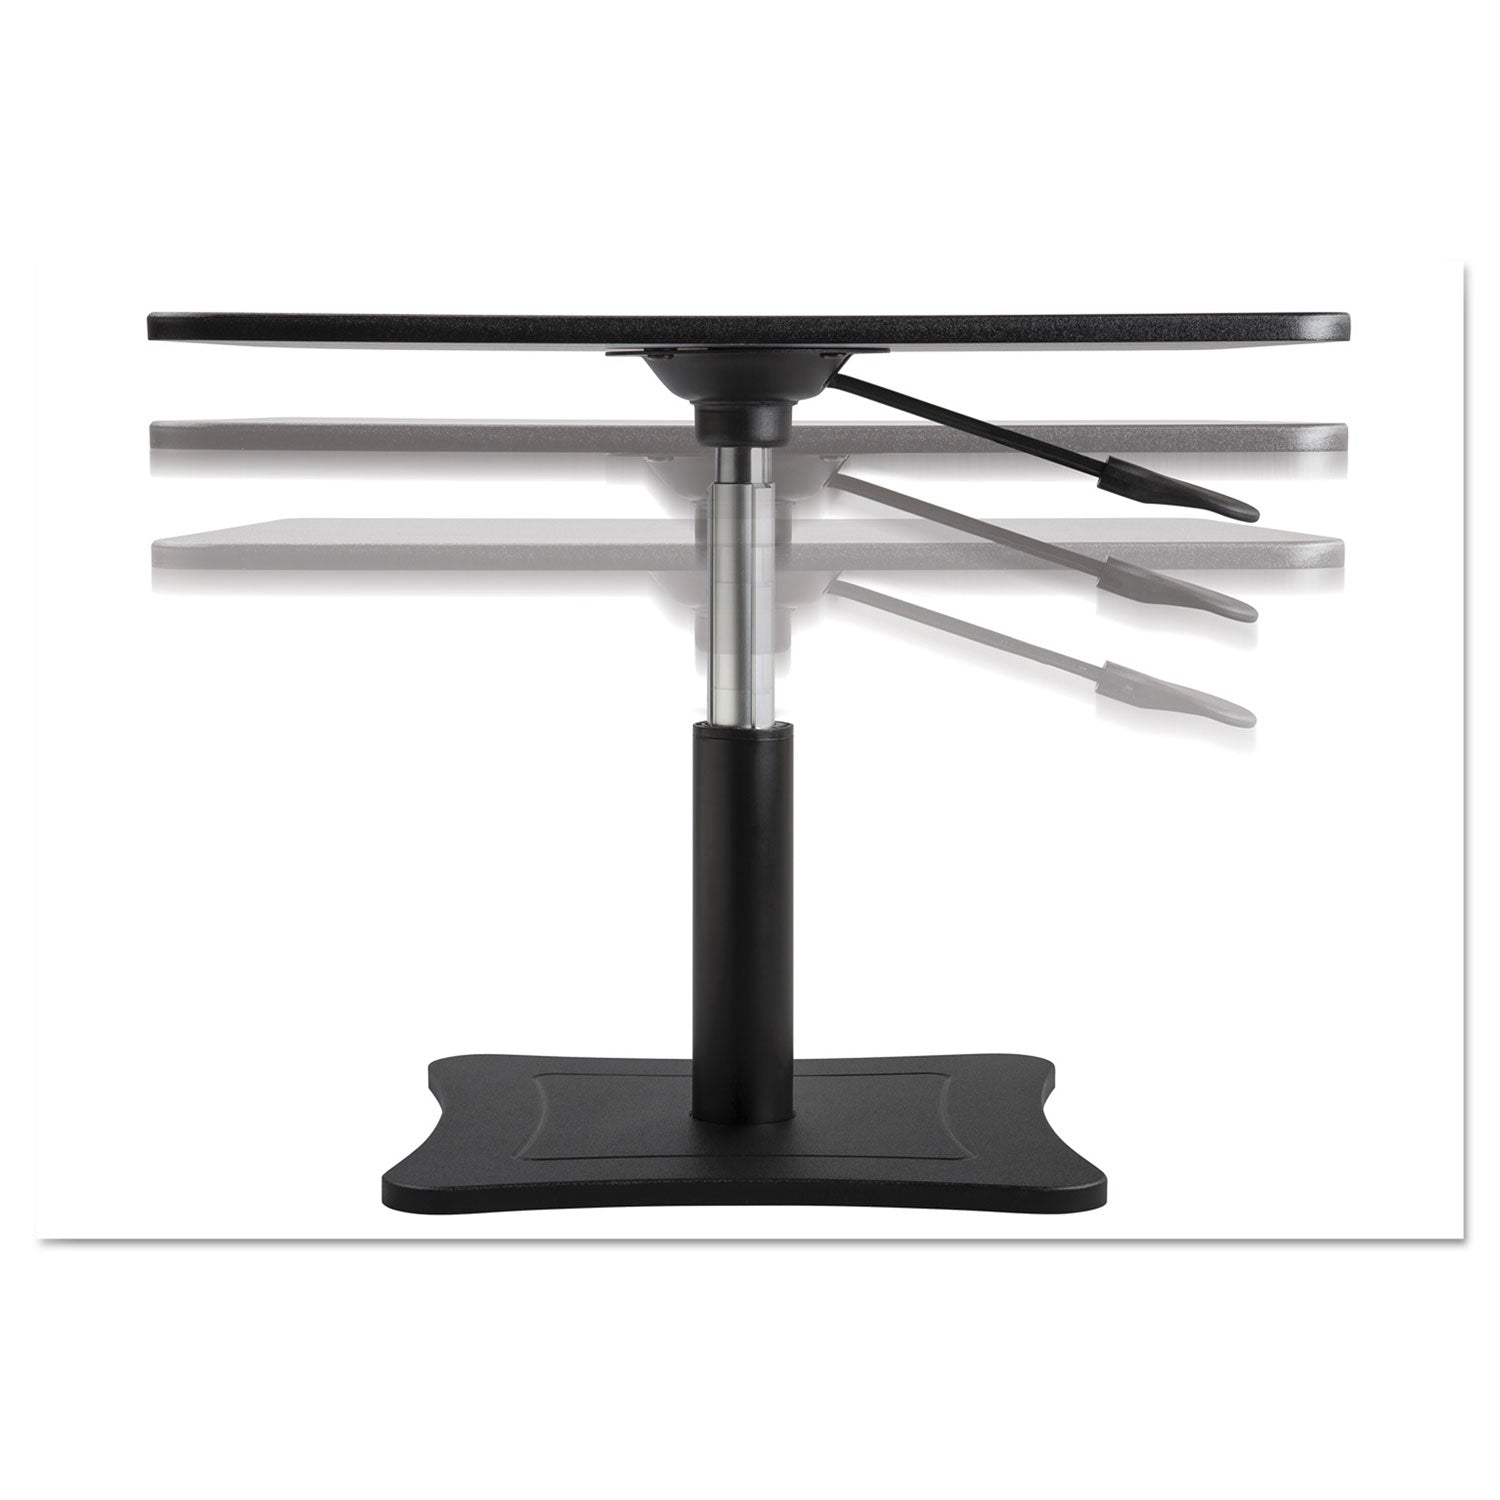 dc230-adjustable-laptop-stand-21-x-13-x-12-to-1575-black-supports-20-lbs_vctdc230b - 2